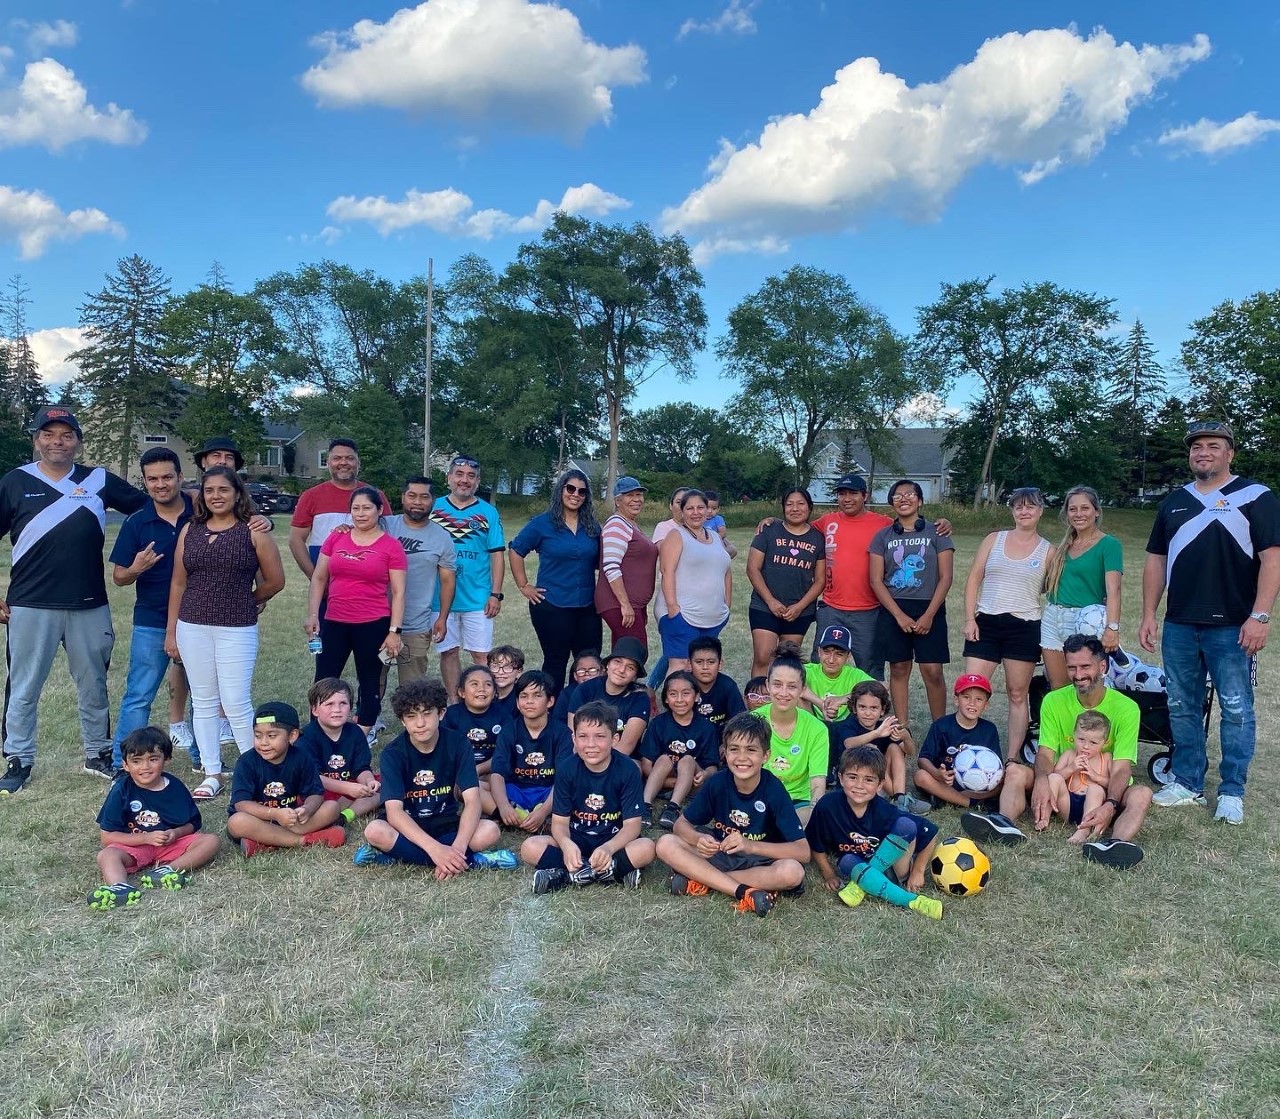 Youth, parents and staff at Esperanza United summer camp soccer game